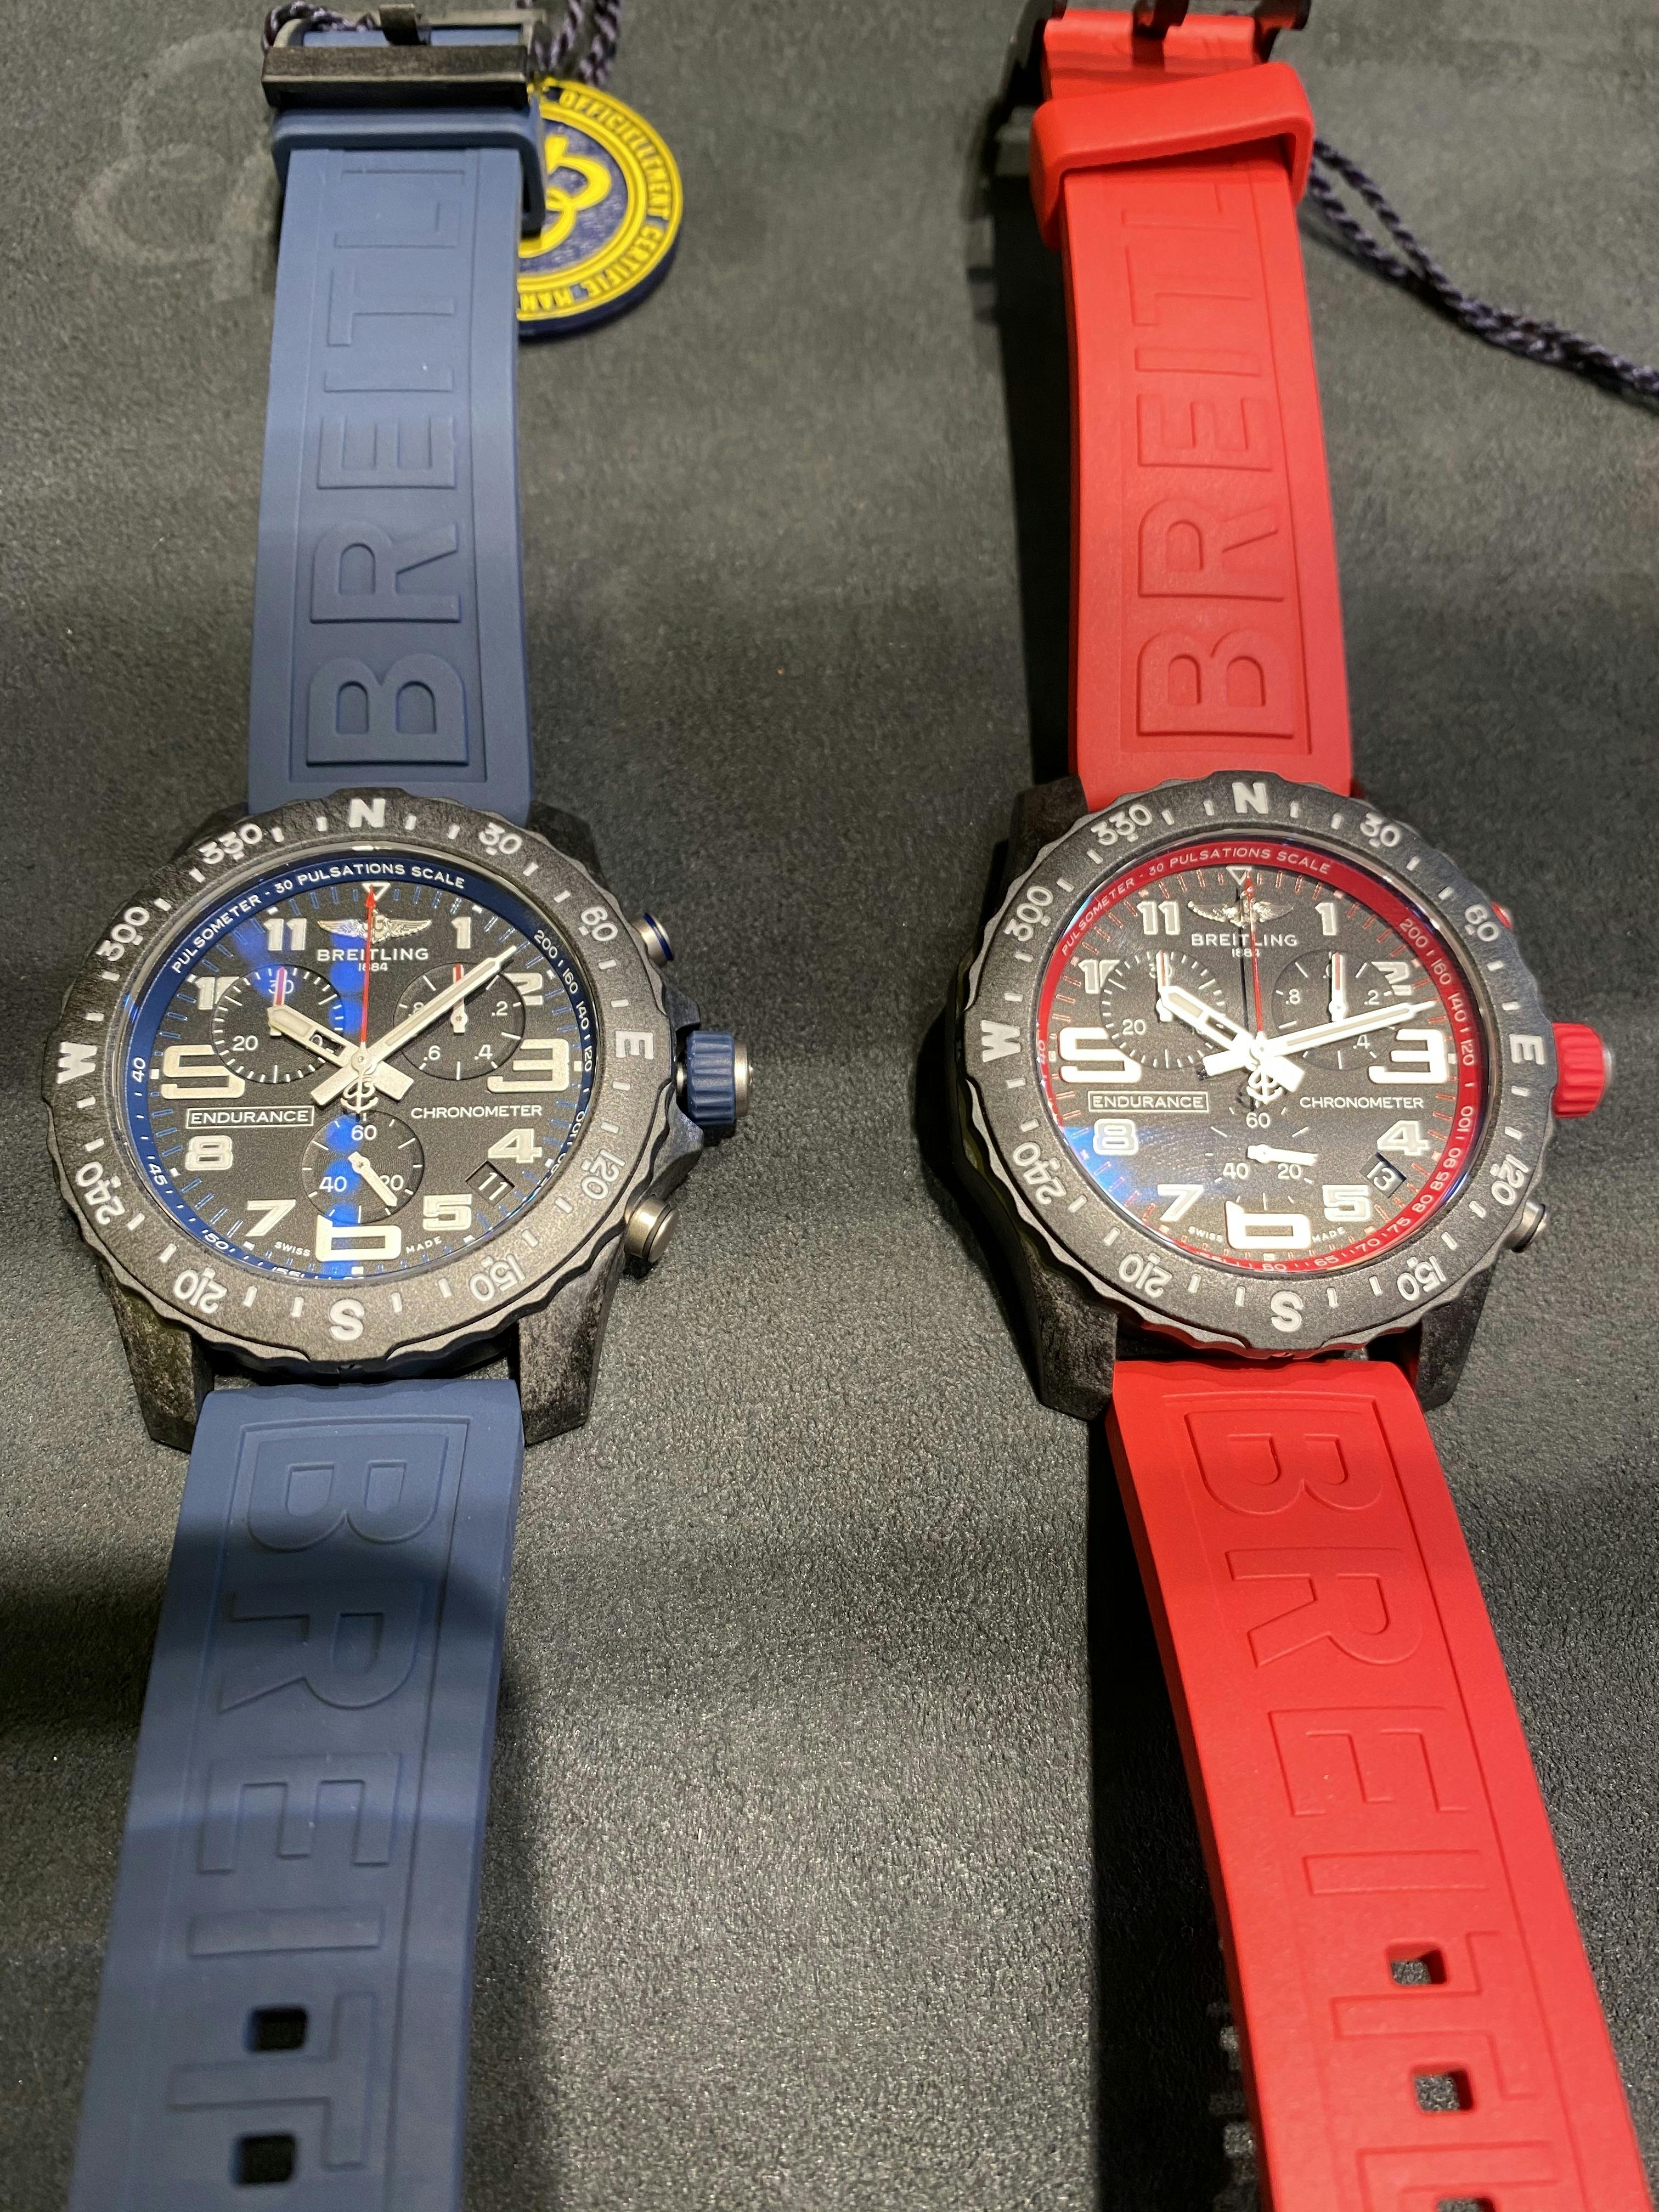 2 Breitling being compared